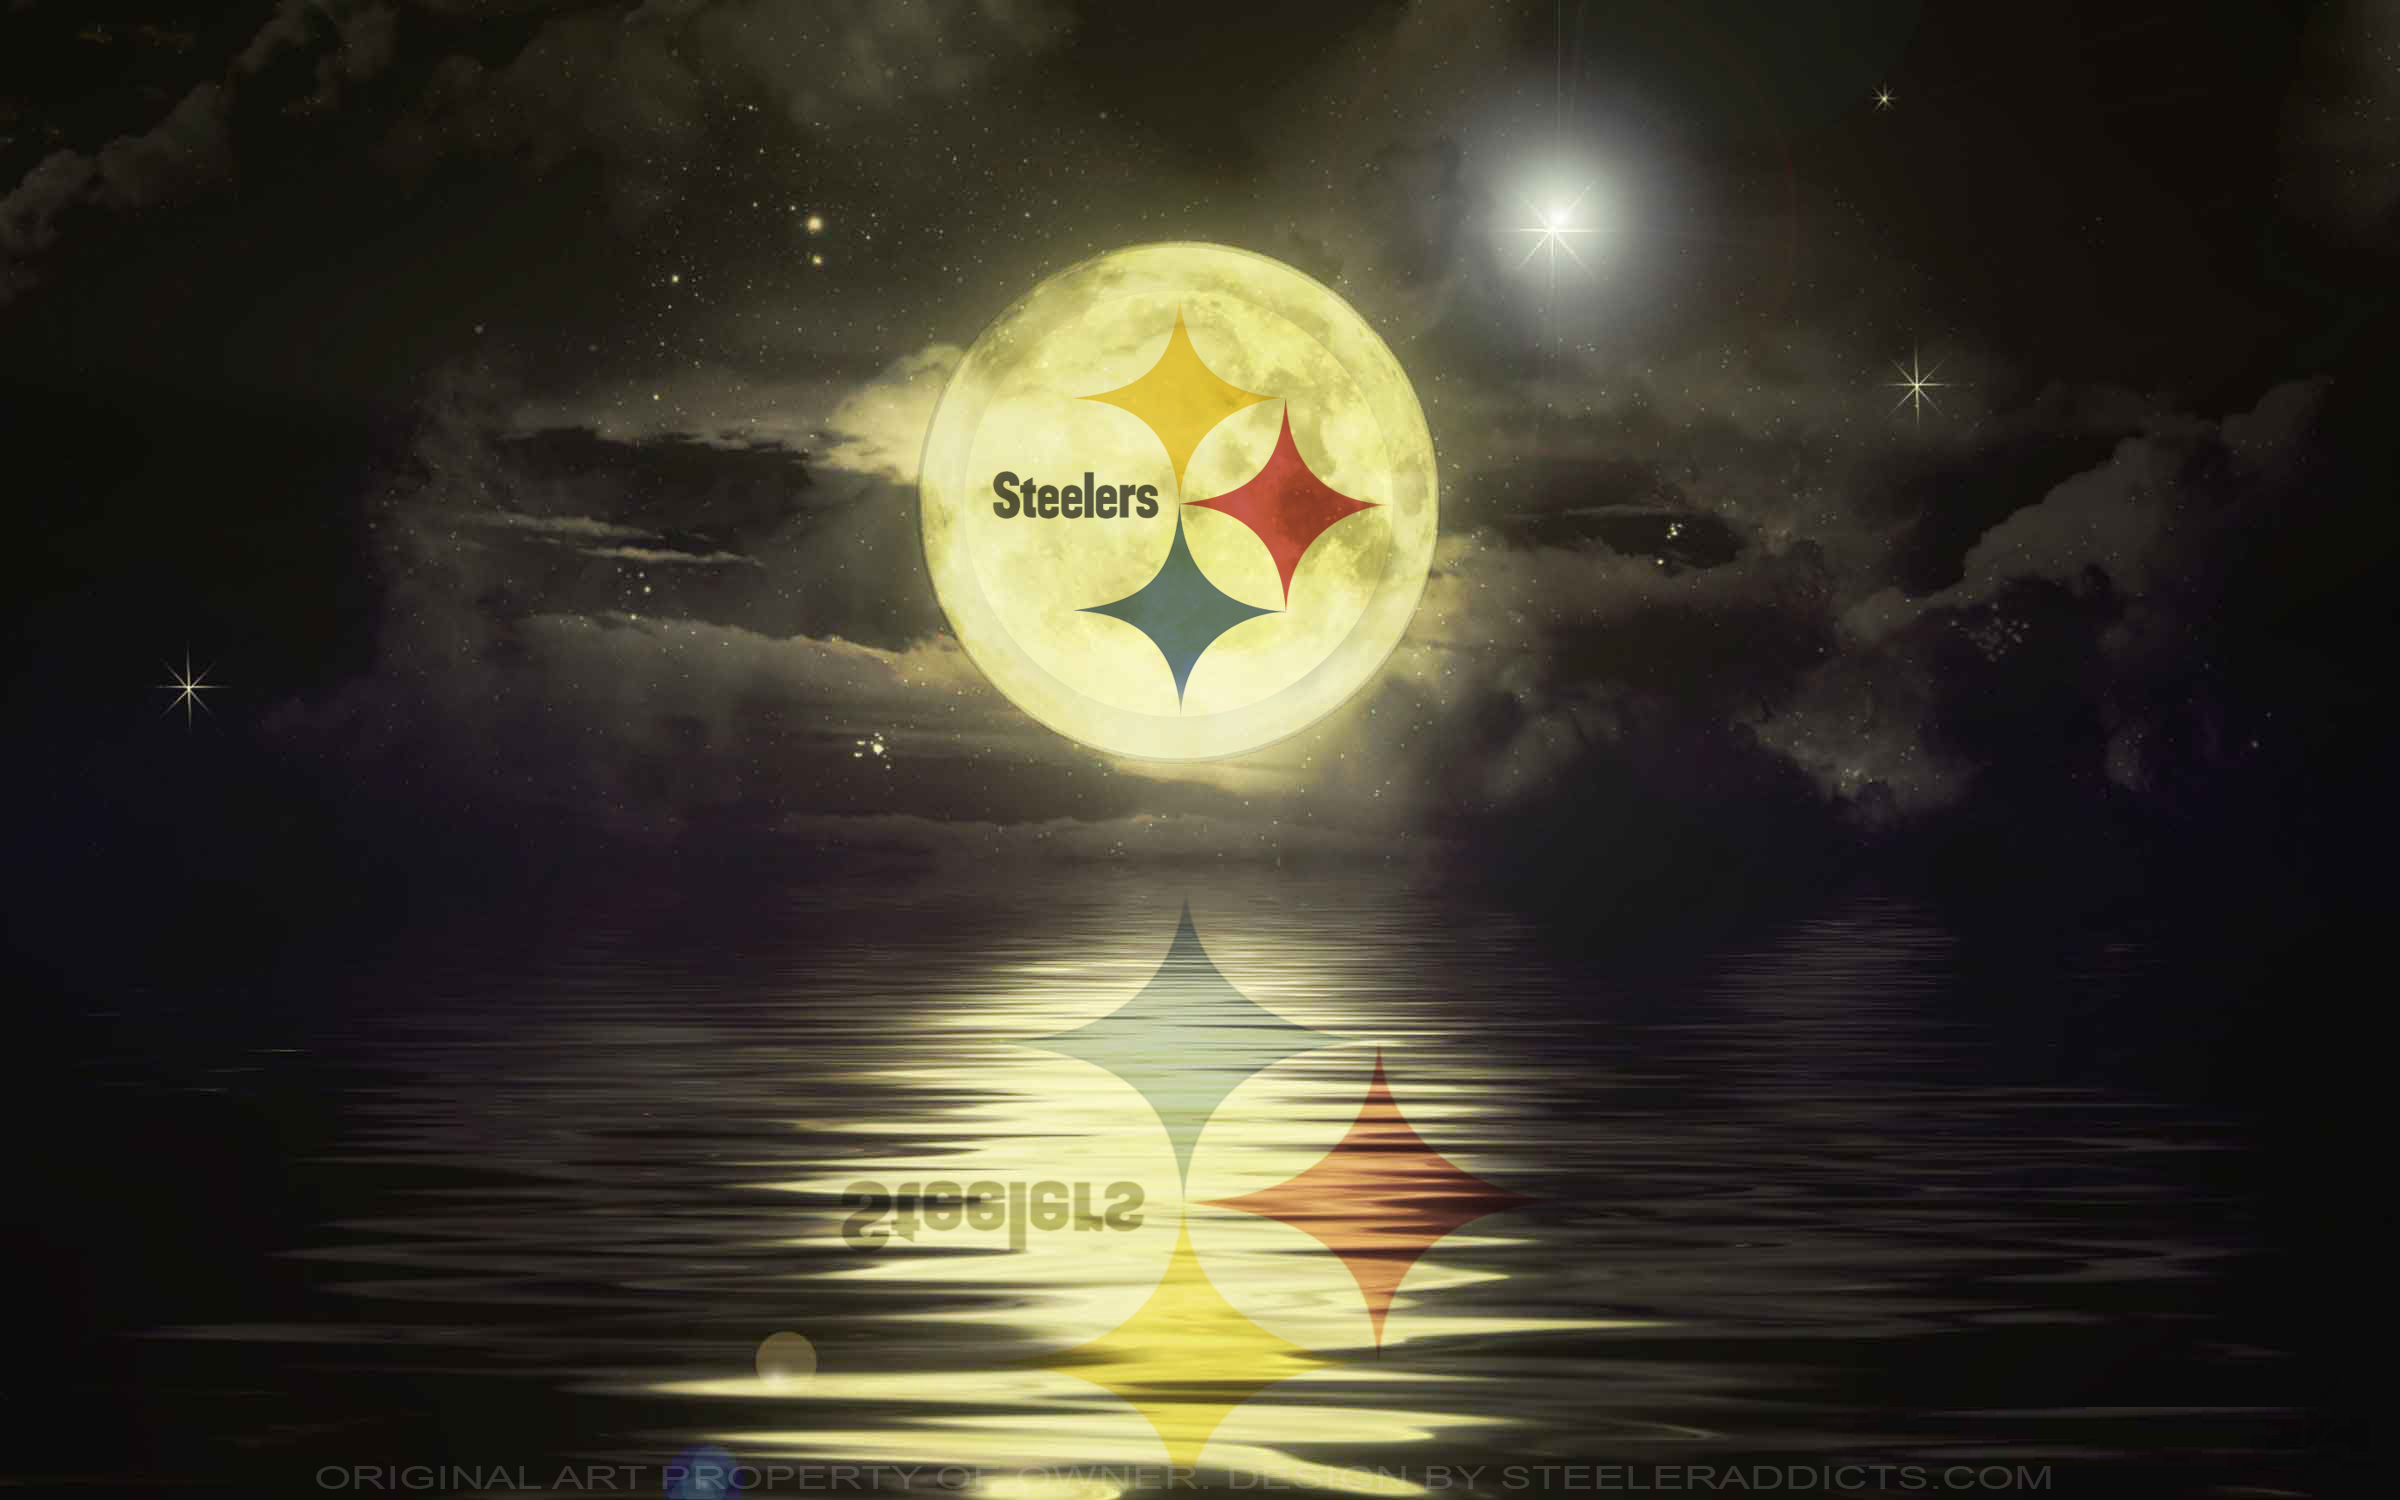 Image About Steelers